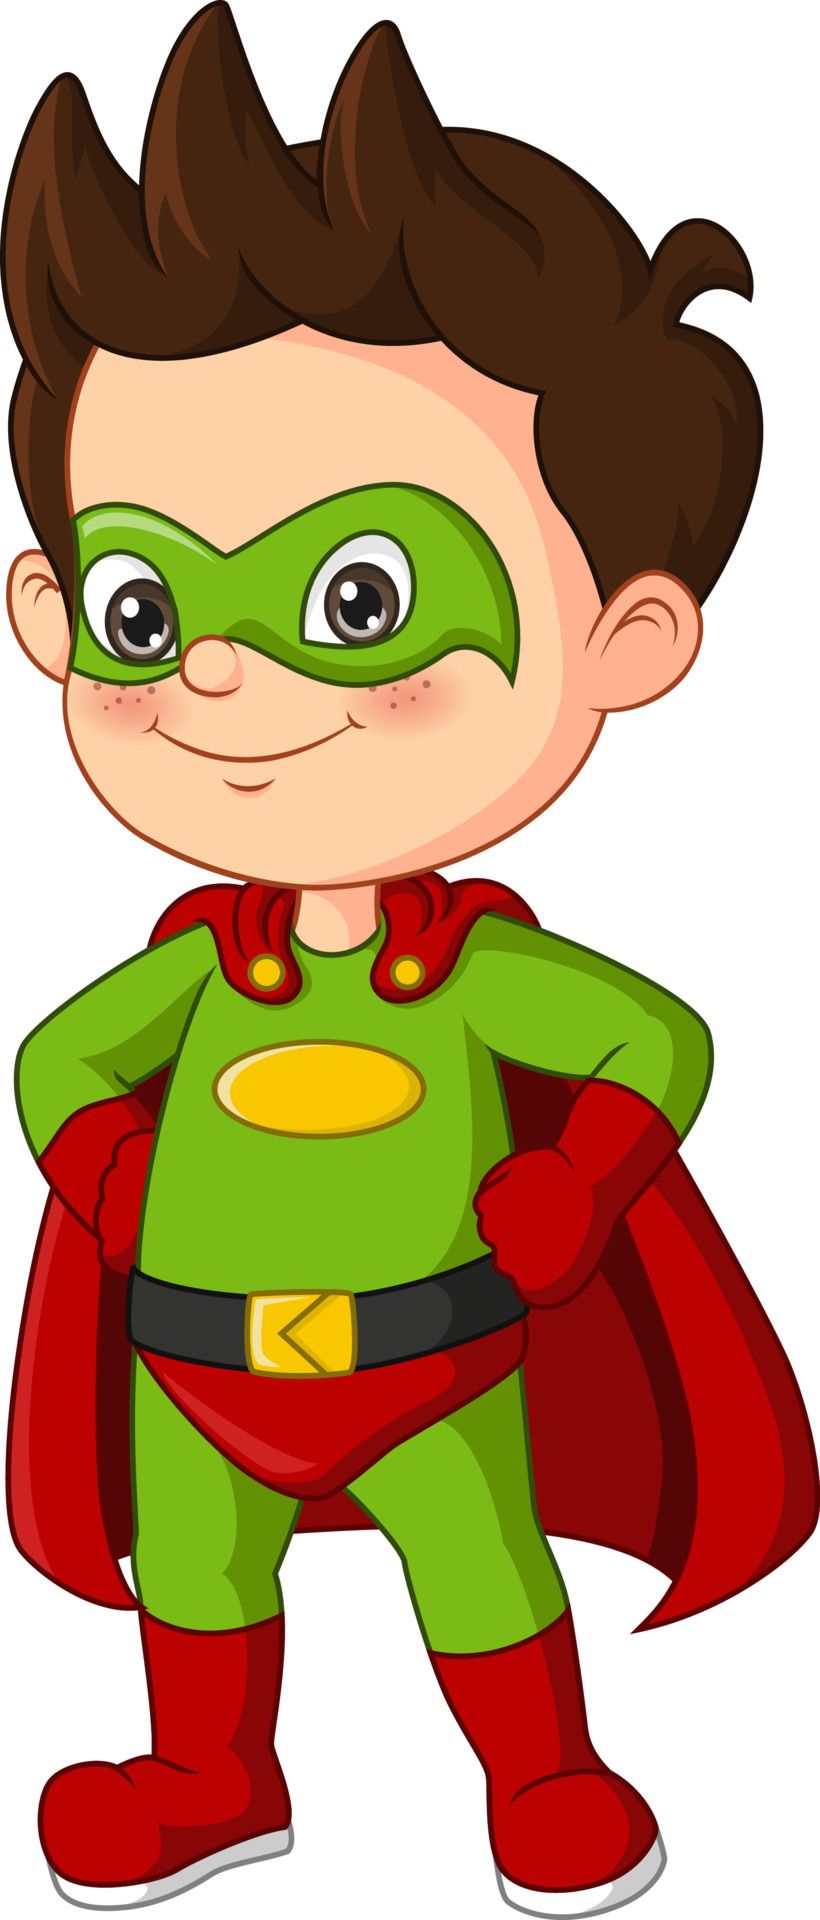 A cartoon boy in a superhero costume is standing with his hands on his hips.